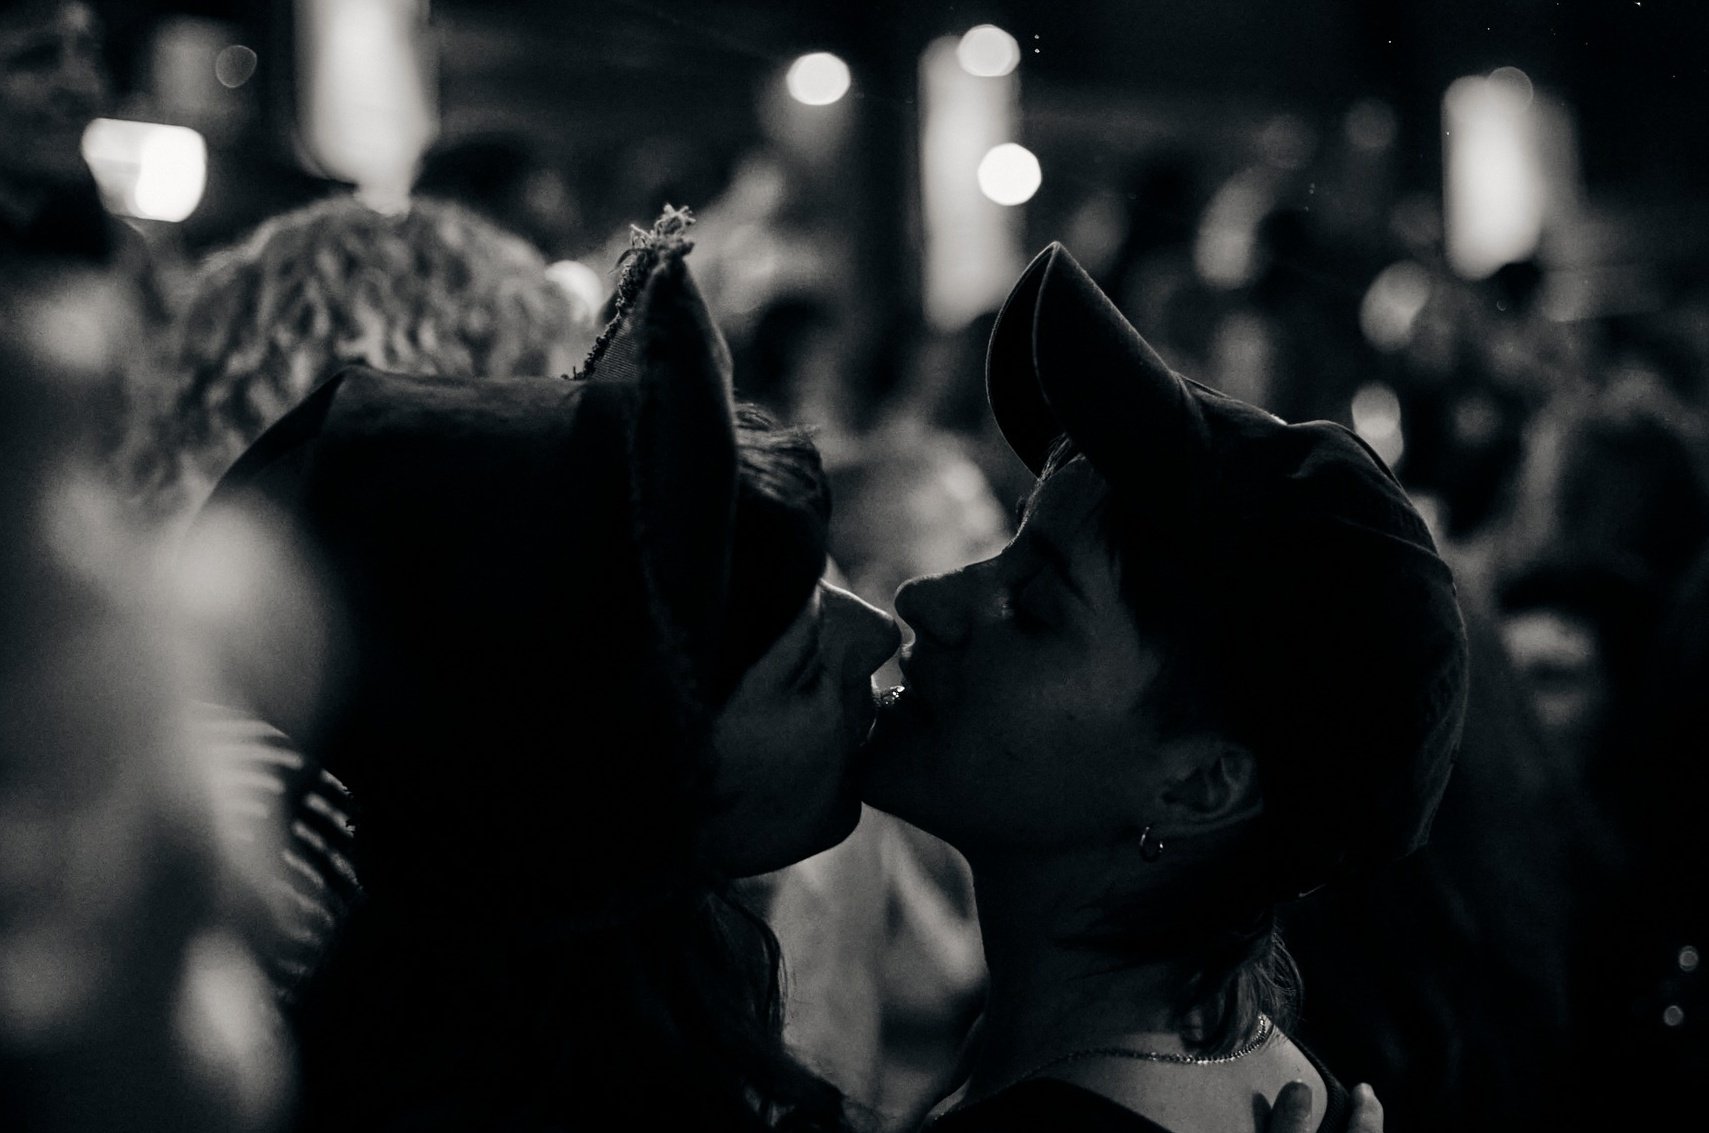 Image of two people at BP events kissing. Both are wearing a baseball cap. It's in black and white.